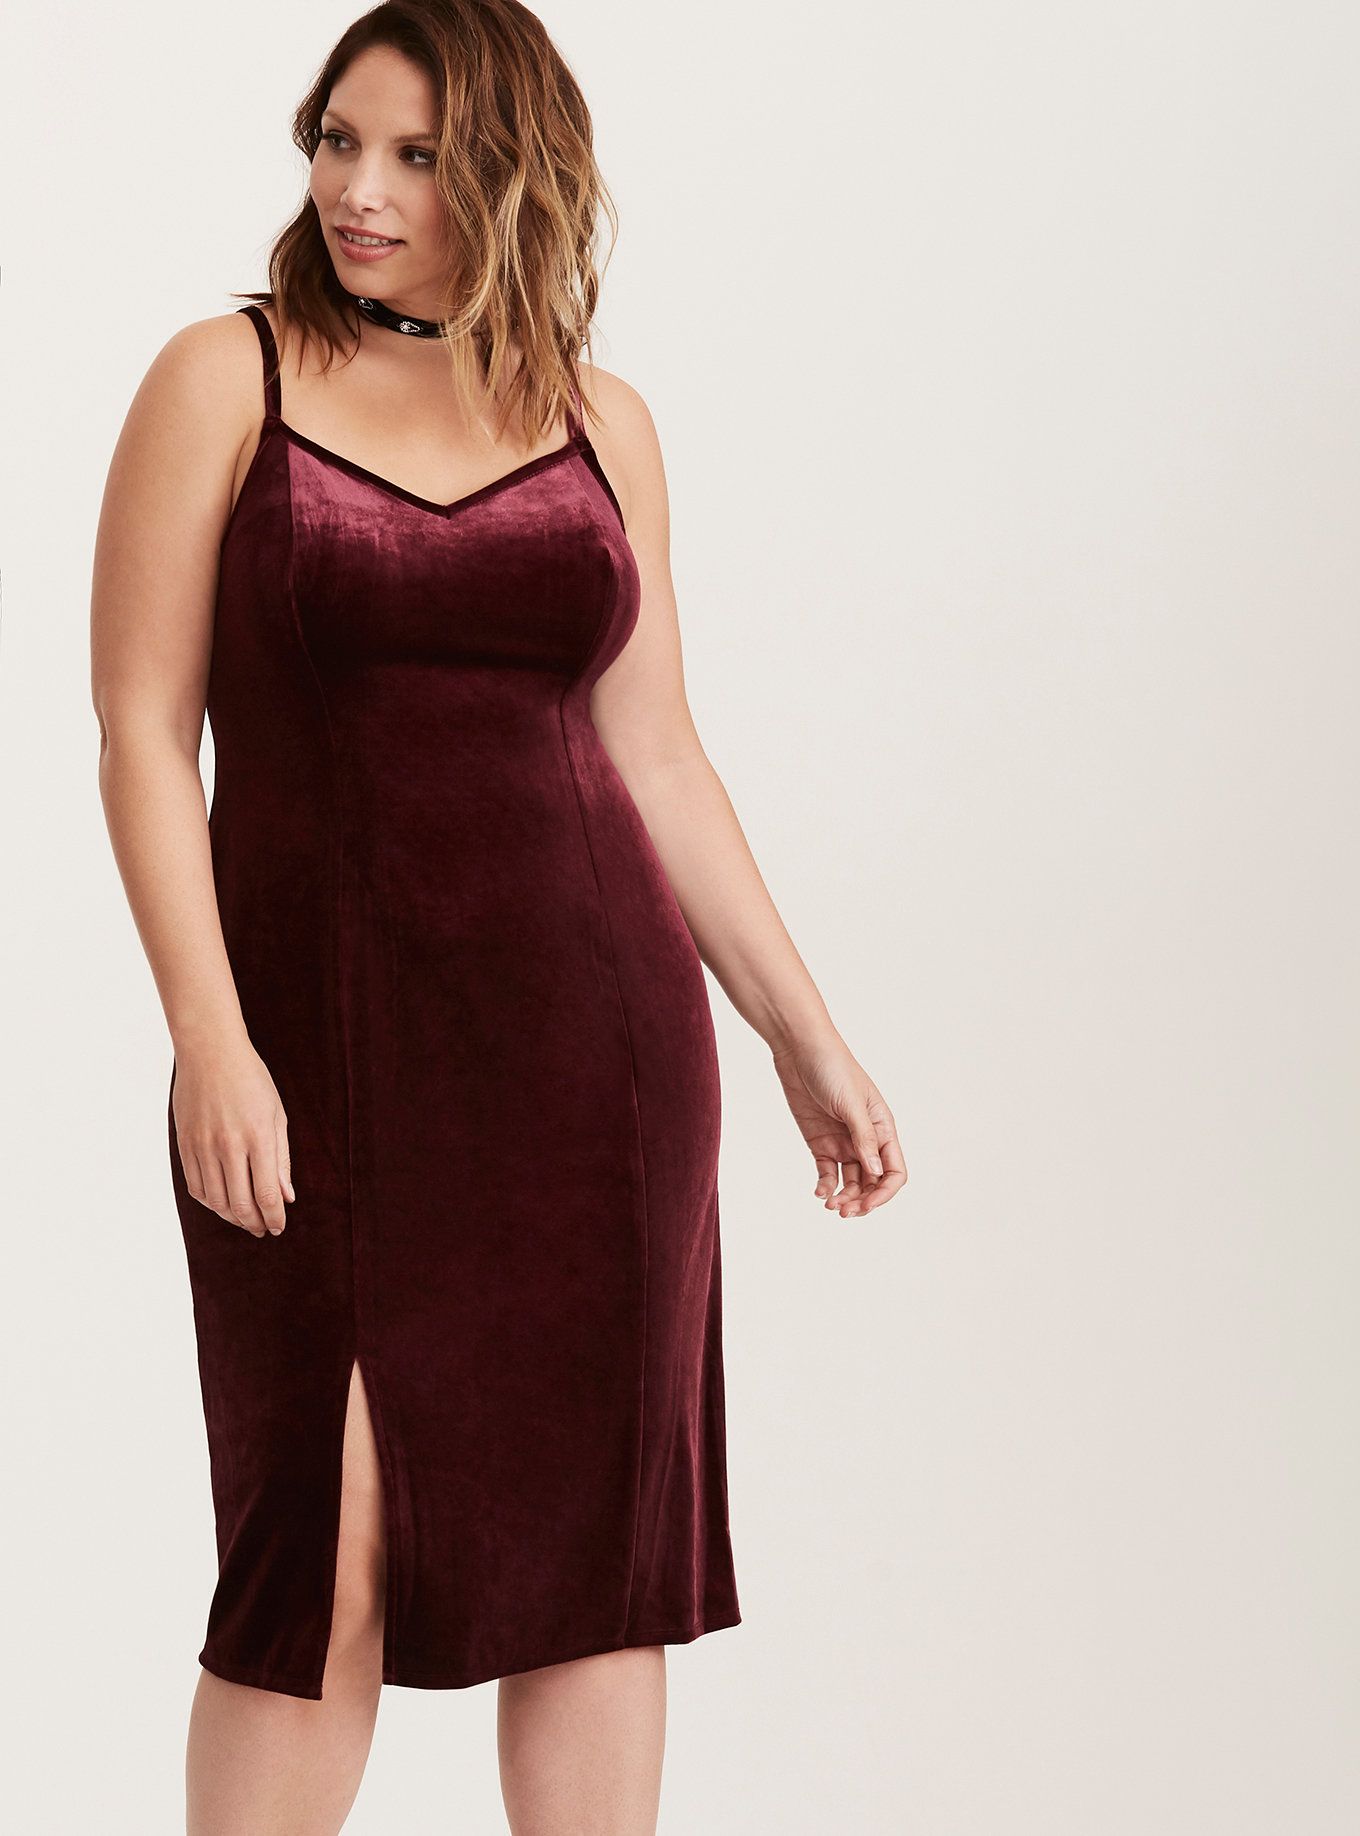 23 plus-size party dresses perfect for every occasion